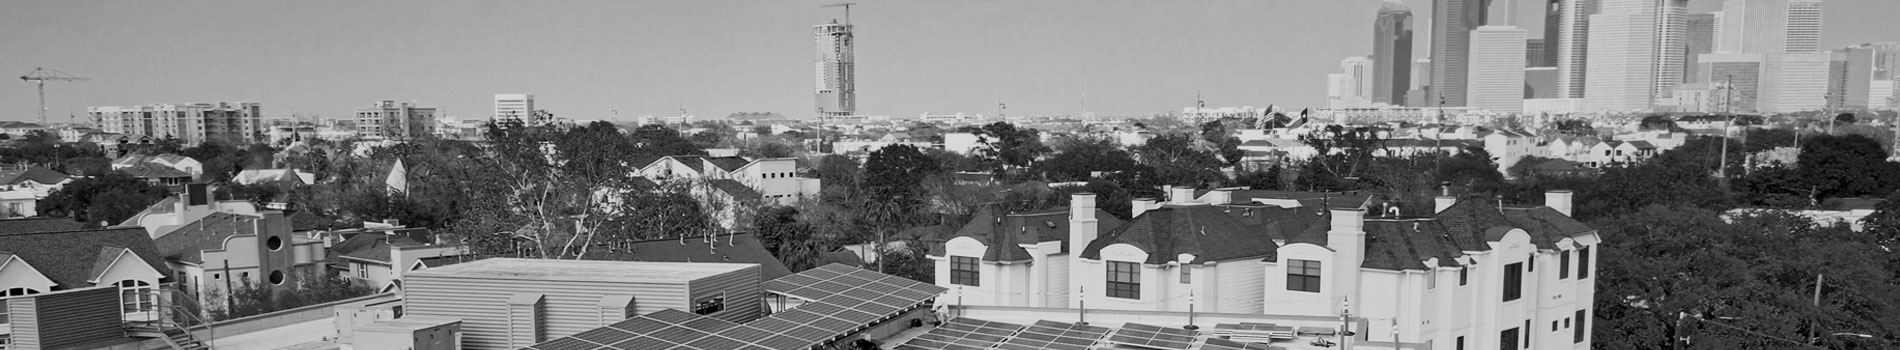 Black and white image of a suburban area with solar panels on the roofs of houses. High-rise city buildings are visible in the background.